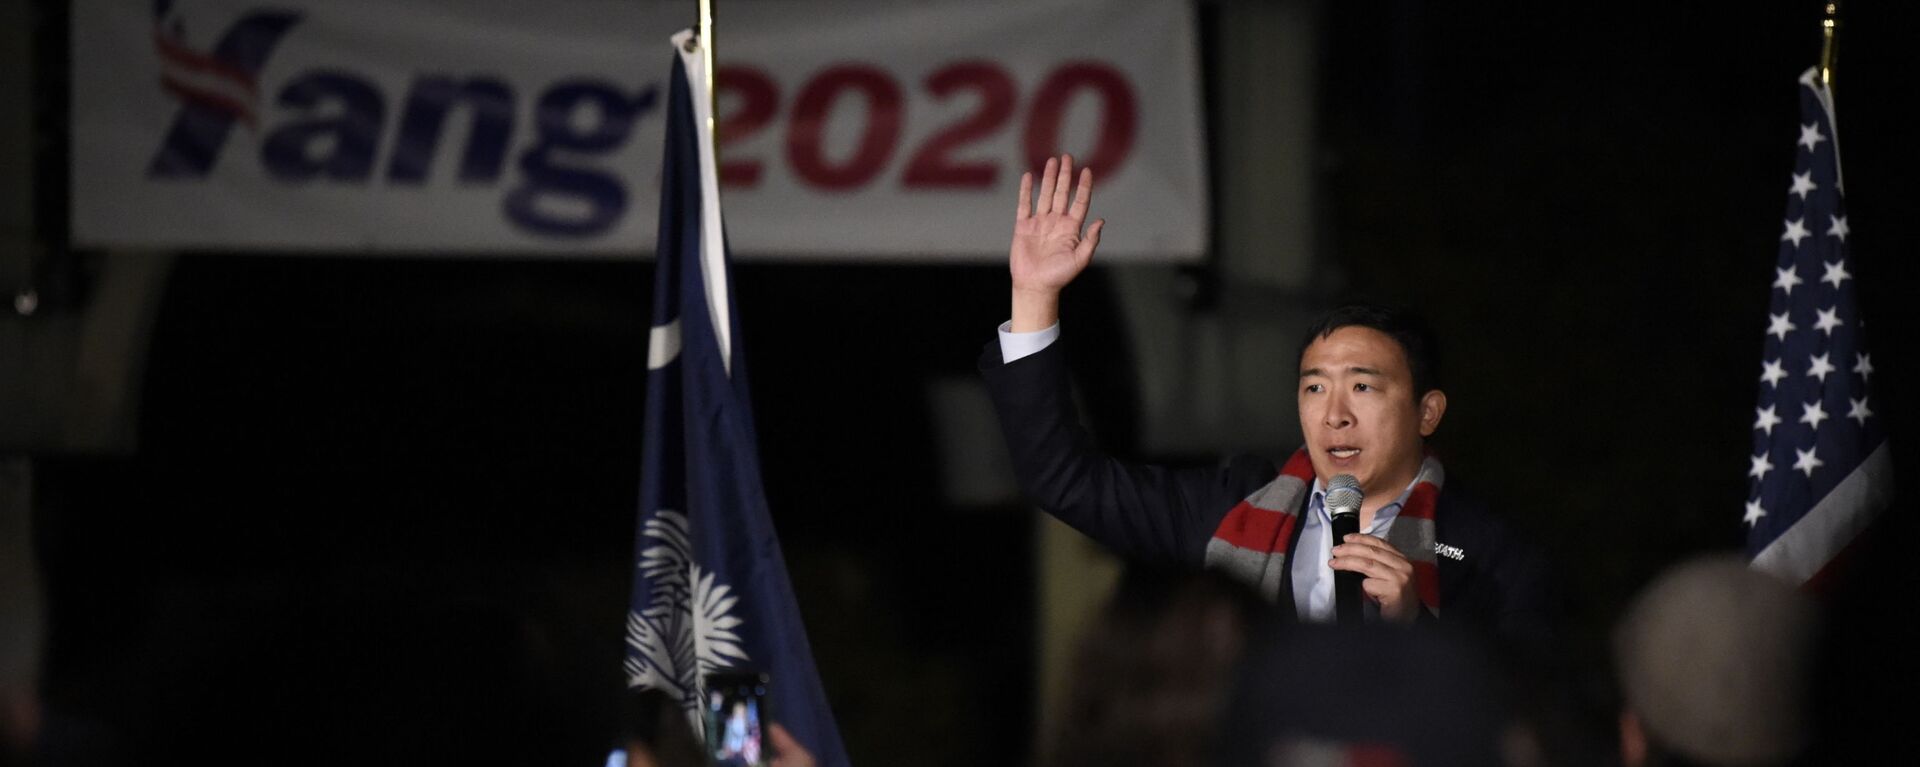 Democratic presidential hopeful Andrew Yang addresses a rally crowd at a campaign event on Friday, Nov. 22, 2019, in Rock Hill, S.C. - Sputnik International, 1920, 10.09.2021